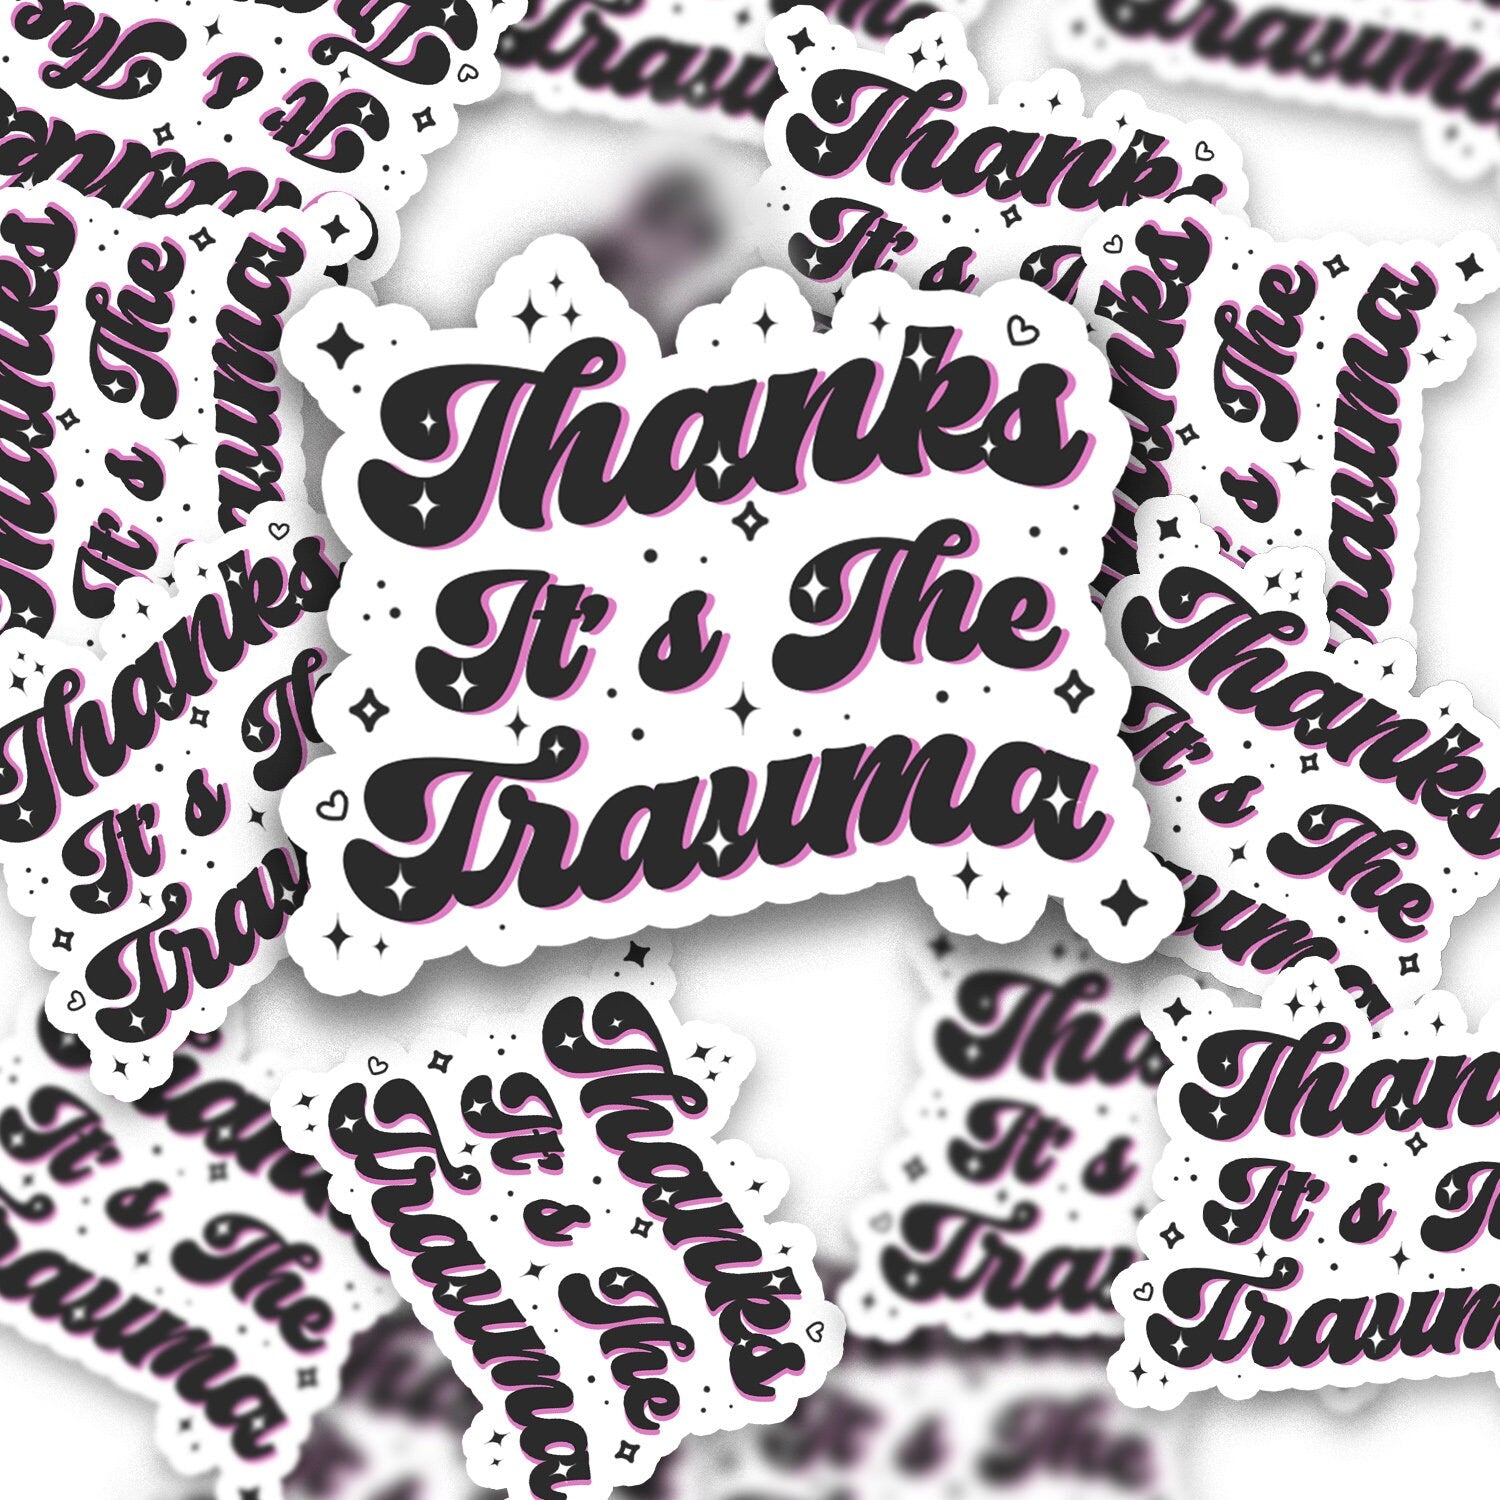 Thanks It’s The Trauma Sticker - A Retro Mental Health Stickers, Bookish, Kindle Stickers, Book Stickers, iPad, Laptop, Water Bottle